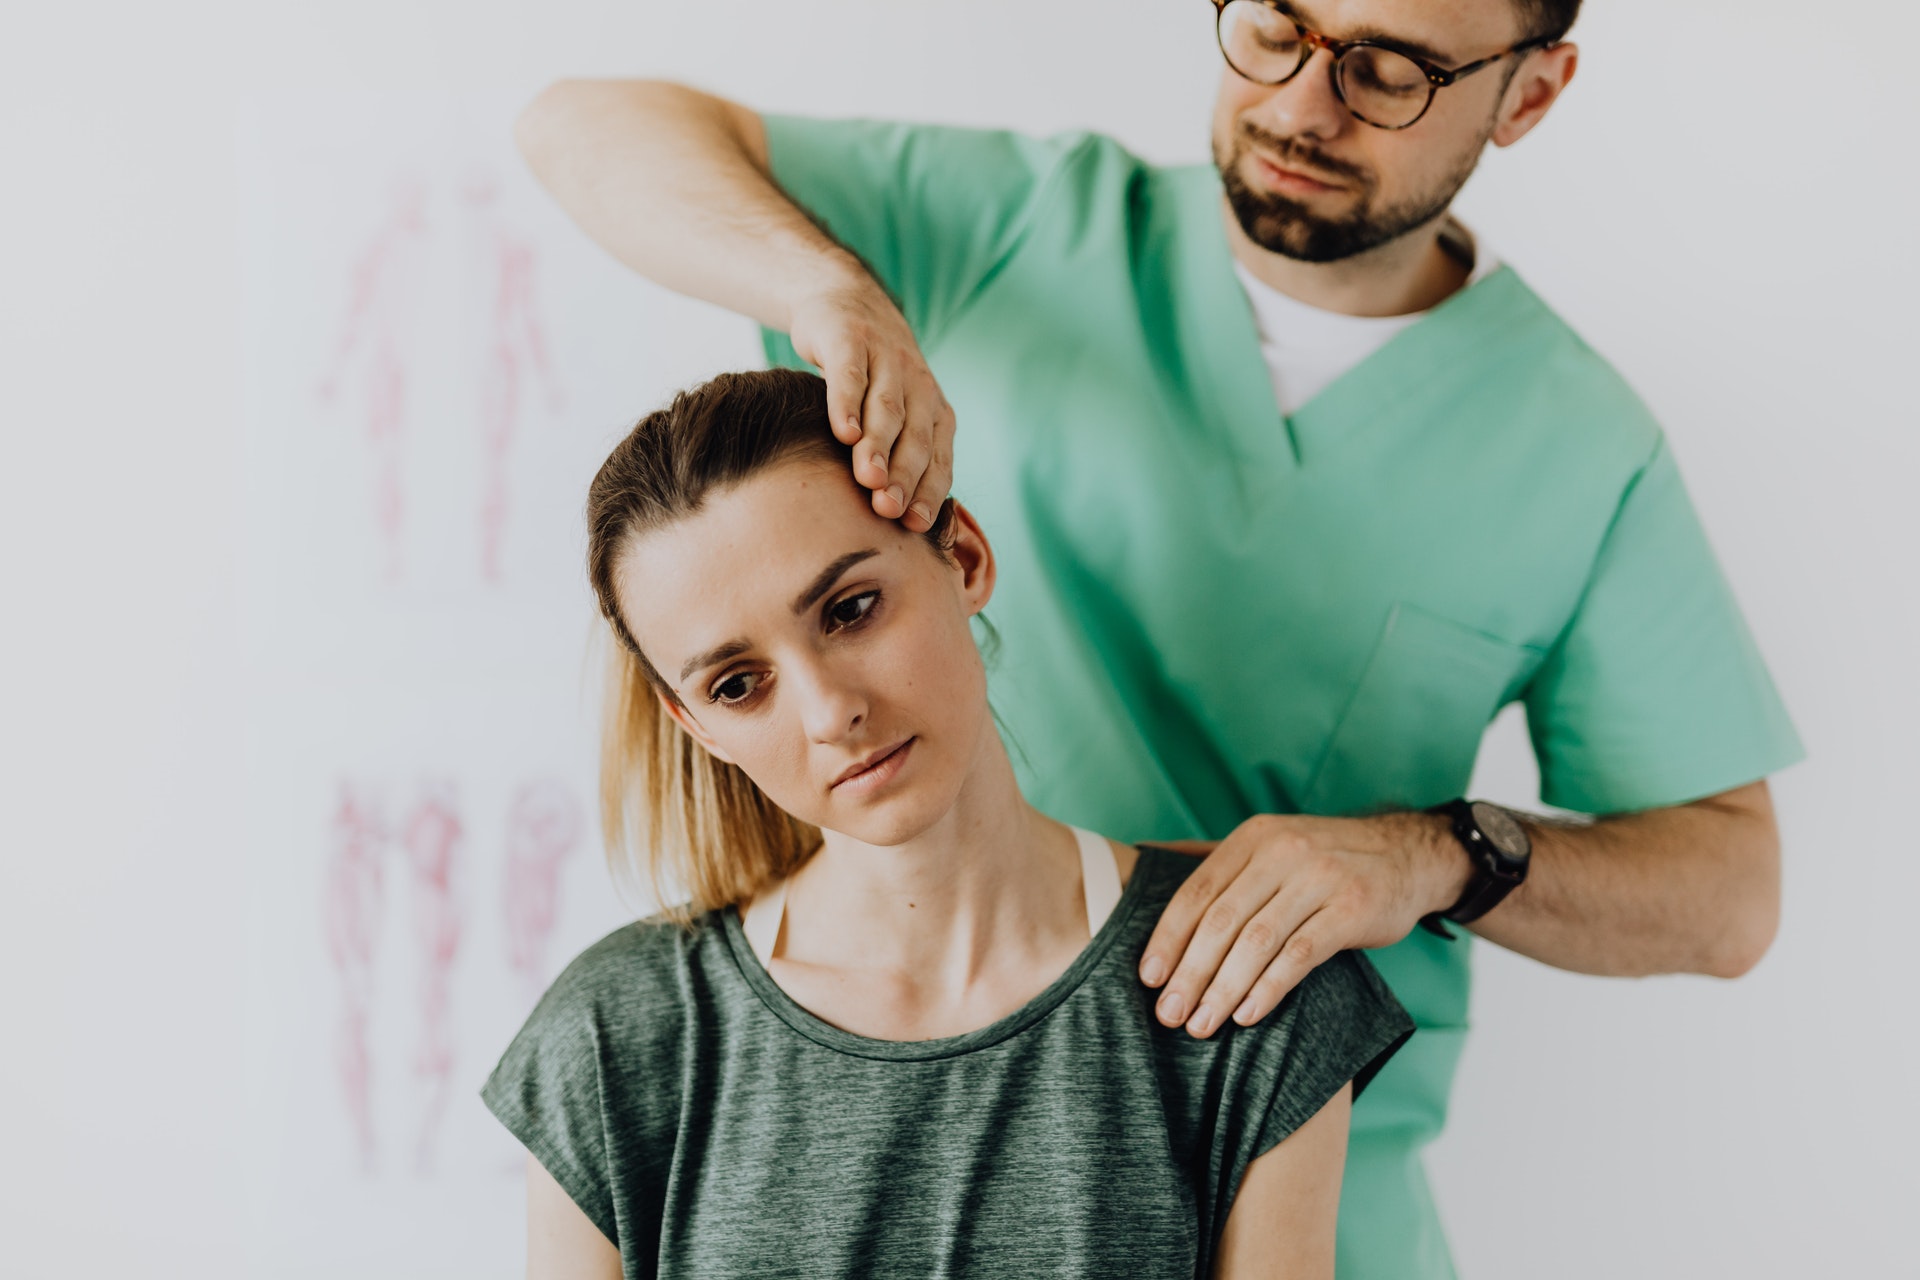 7 Major Benefits of Seeing a Chiropractor to Treat TMJ